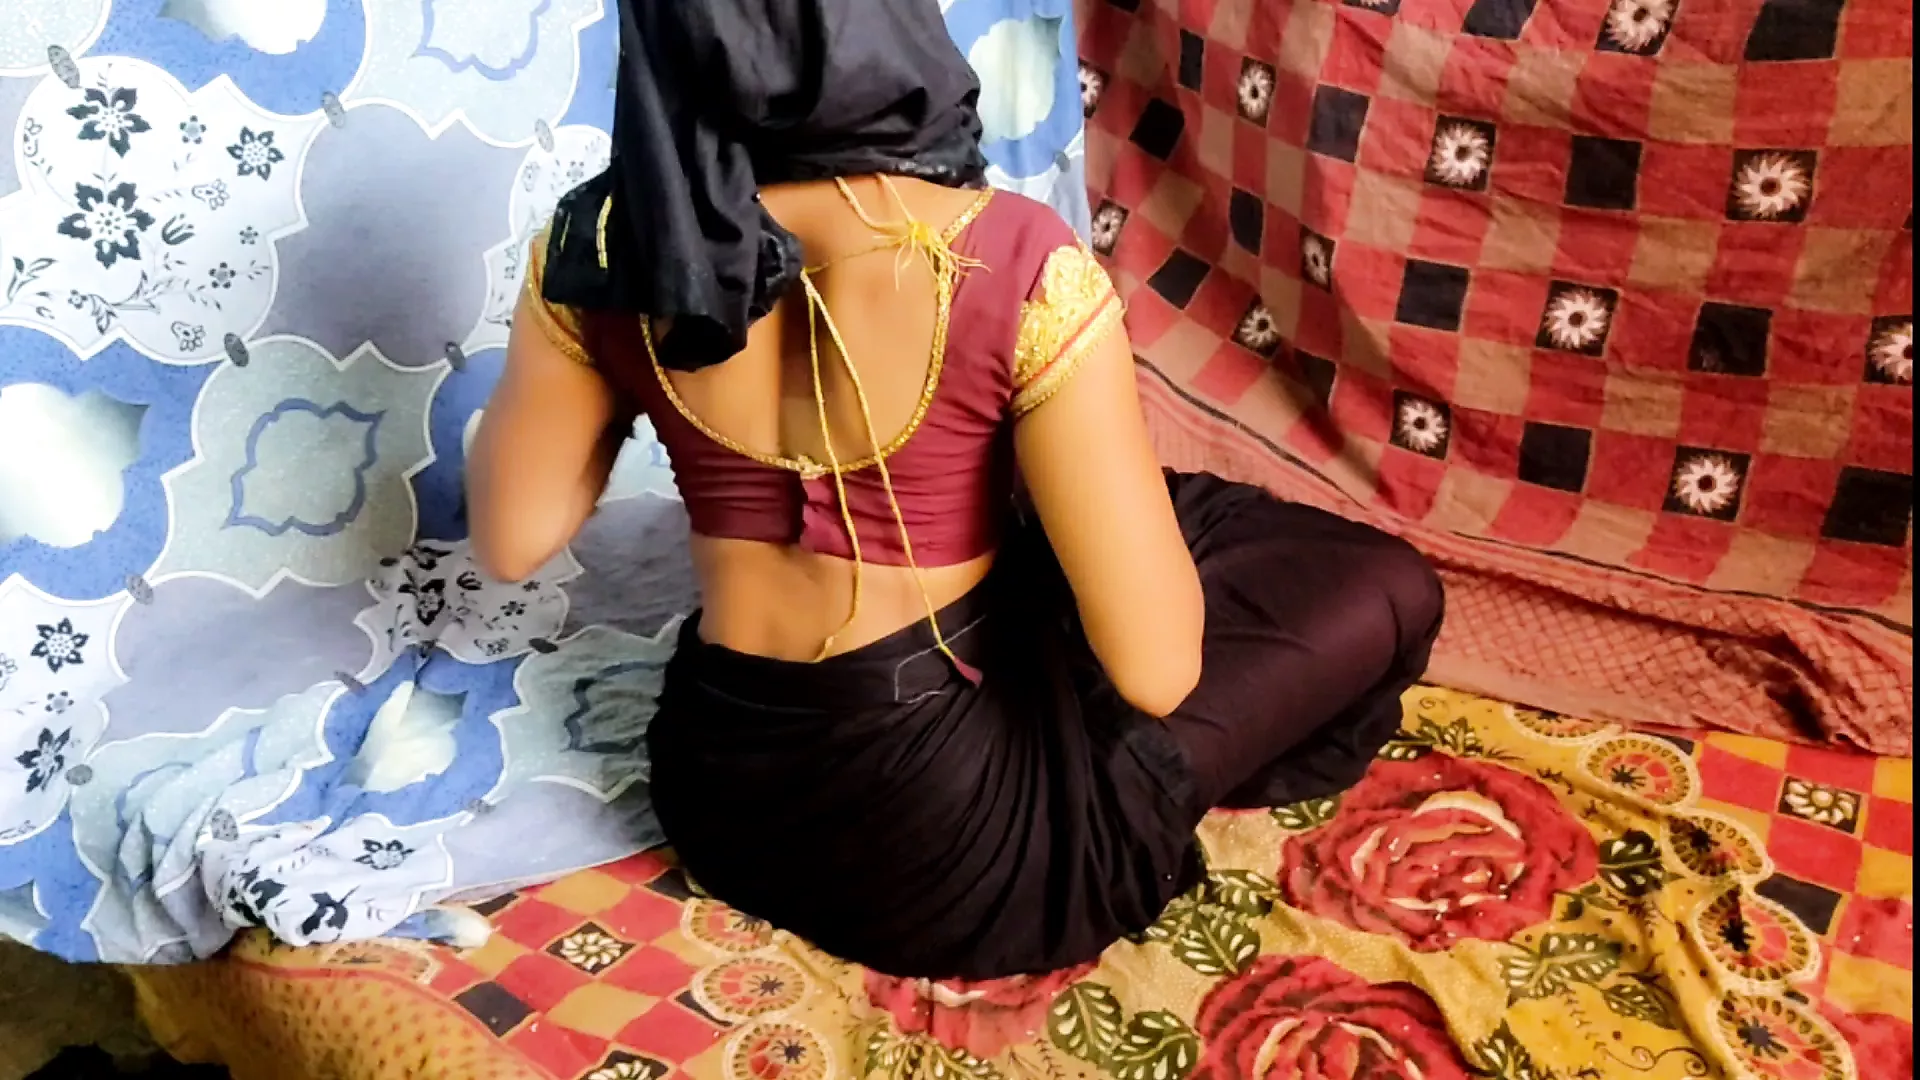 Newly Marriage Couple Honeymoon Sex Video in Clear Hindi Audio | xHamster